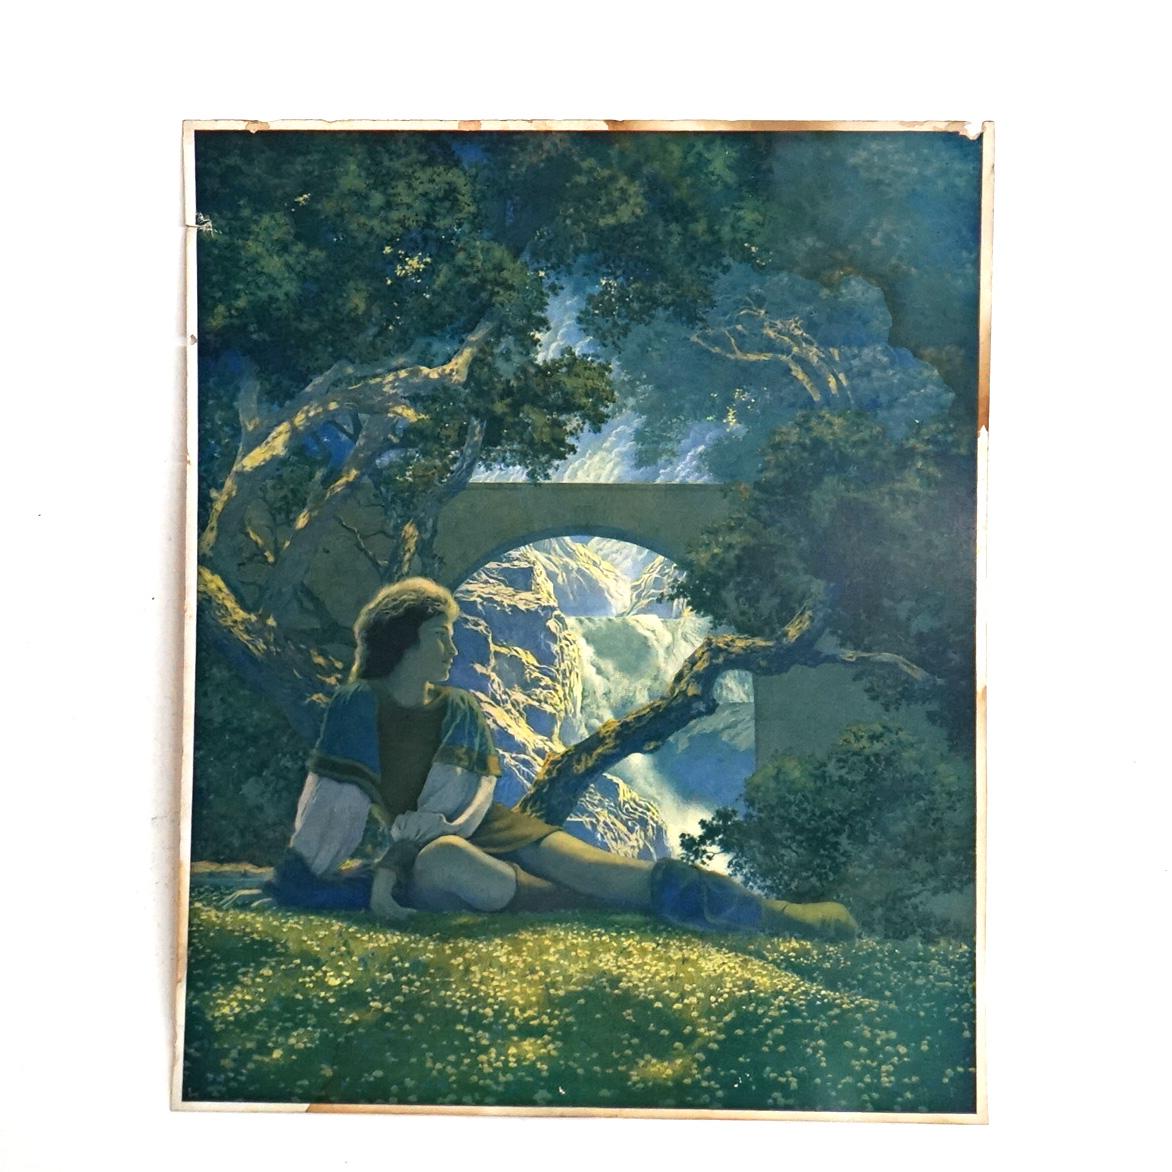 Three Art Deco Maxfield Parrish Prints Including “The Prince” C1920 For Sale 2